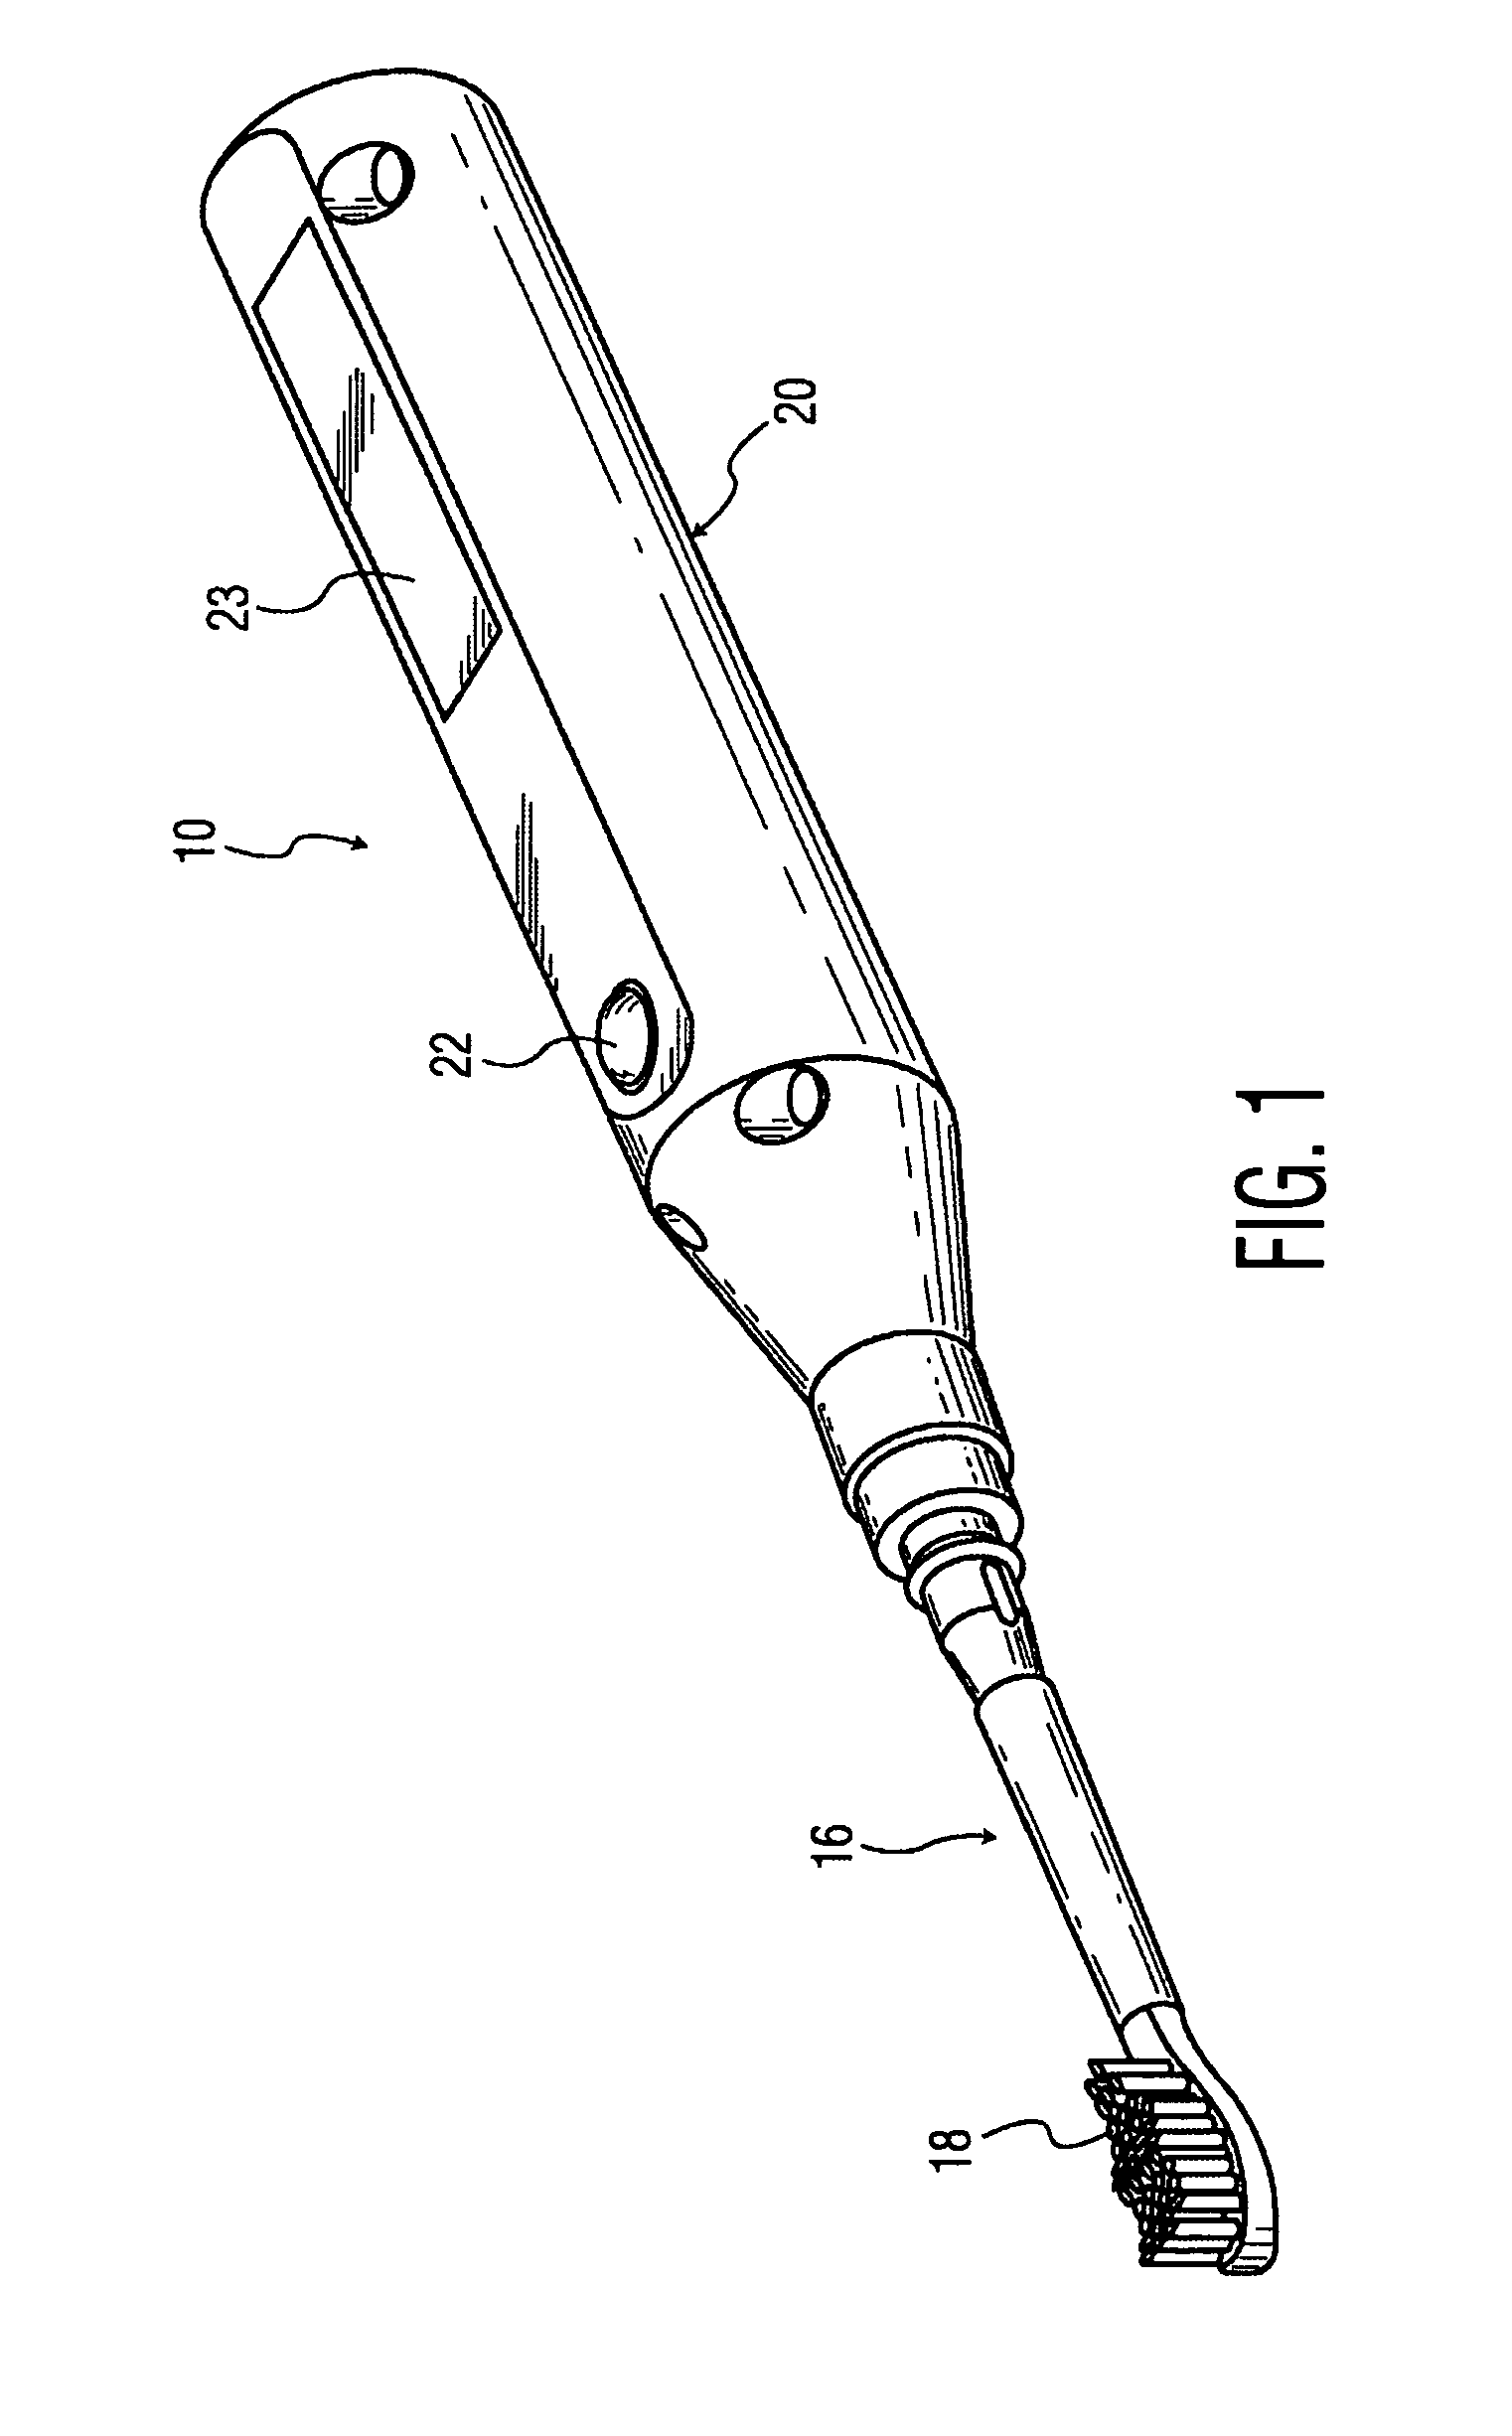 Reciprocating workpiece device with a drive system seeking the resonance of the driven system portion thereof